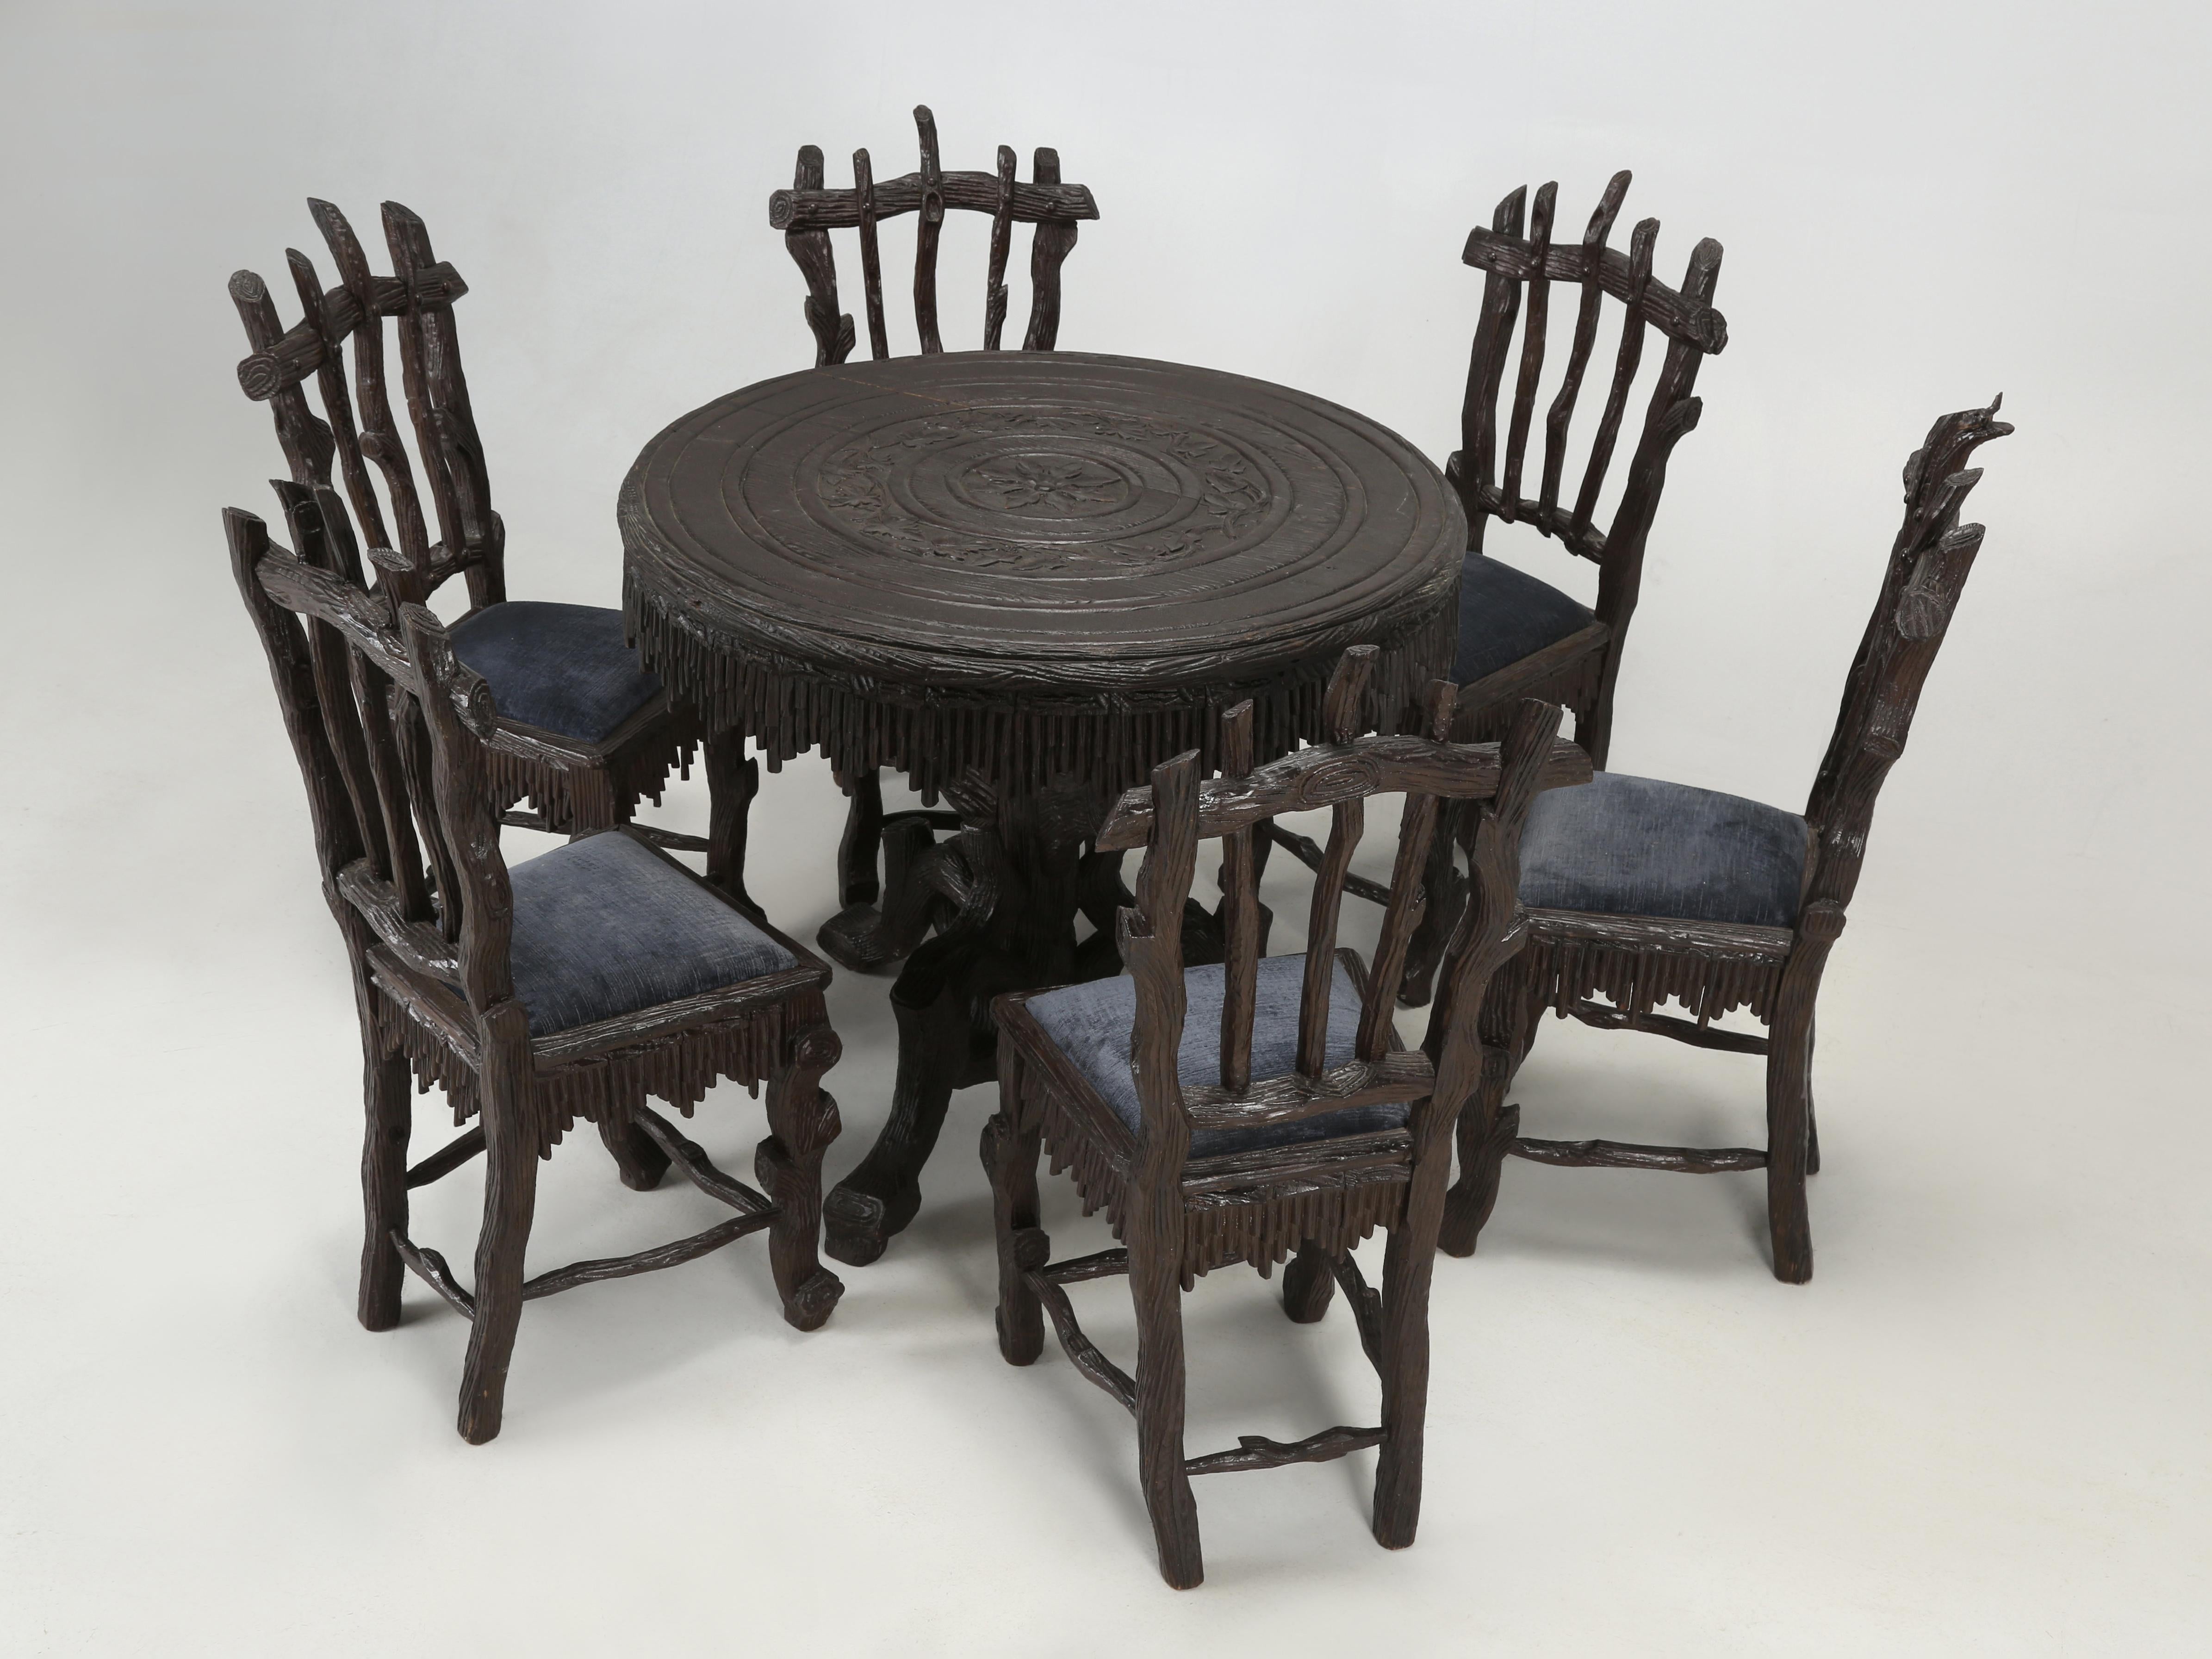 Antique Black Forest Game Table, Center Hall Table Dining Table circa late 1800s 10